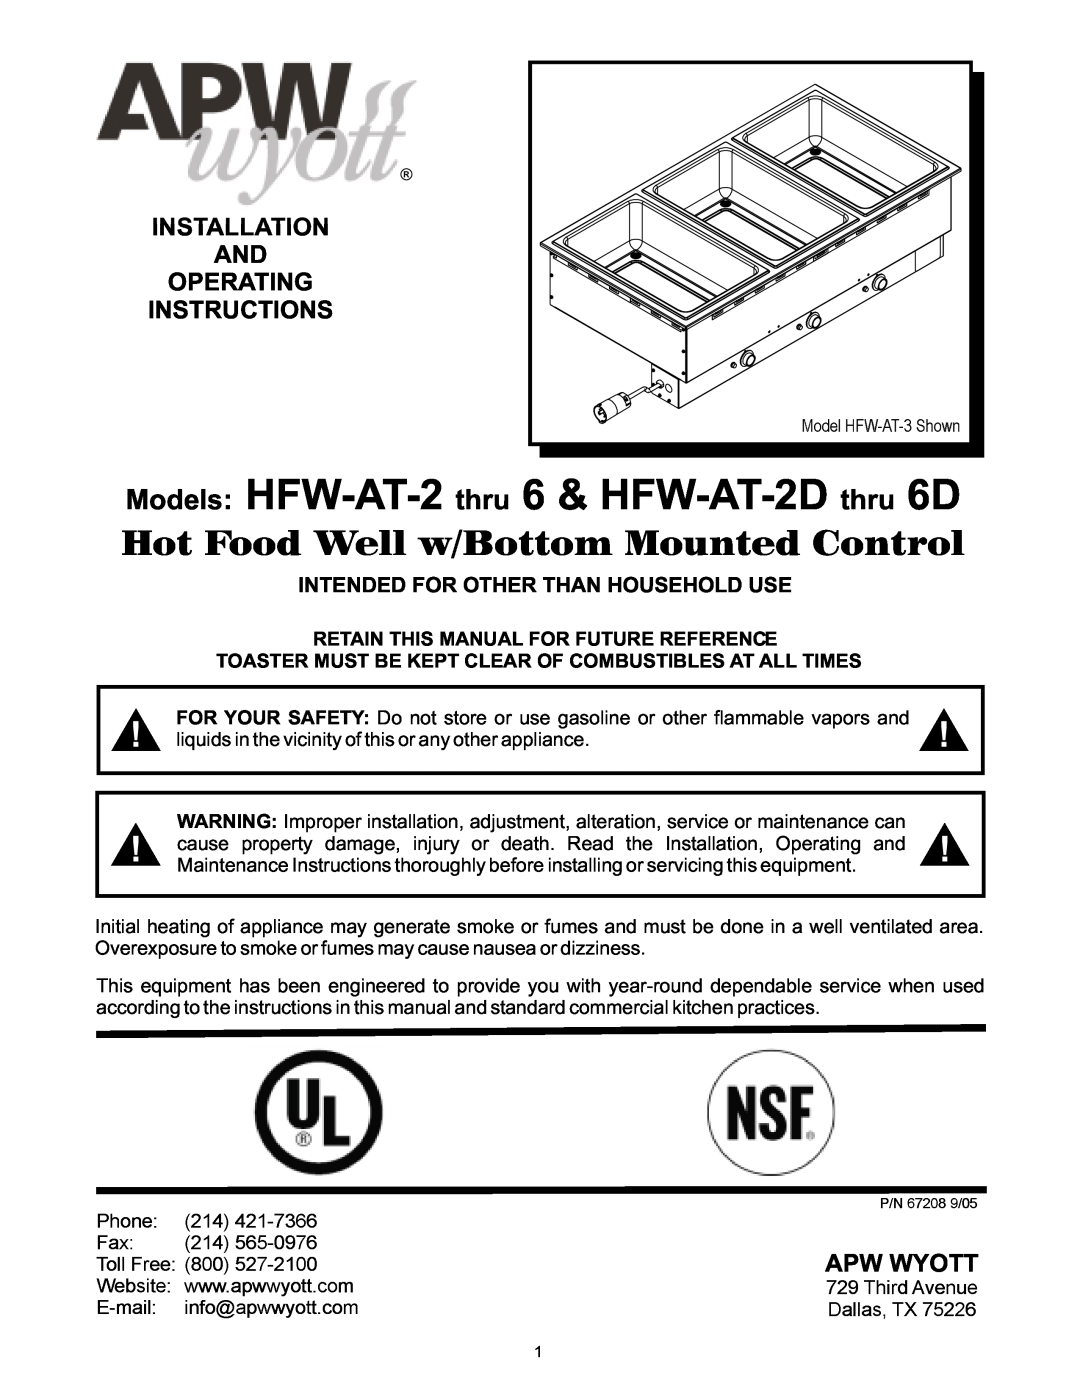 APW Wyott HFW-AT-2 6 operating instructions Intended For Other Than Household Use, Hot Food Well w/Bottom Mounted Control 